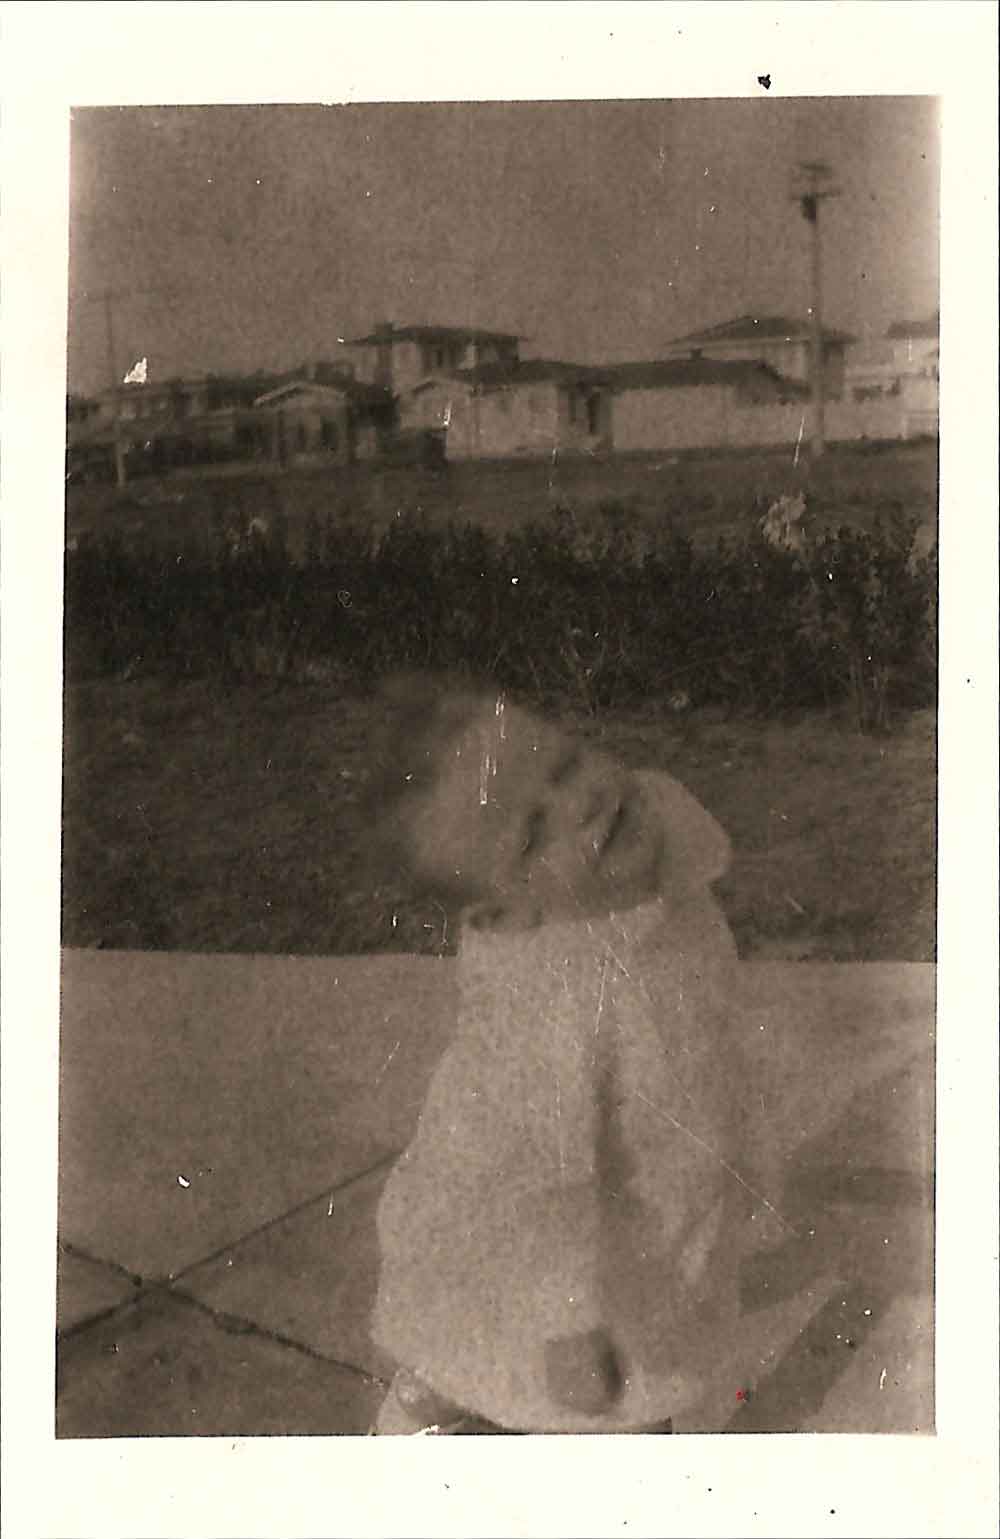 (HTC.2010.8.15) - Hightower Child (probably Frank) on the Drive of 409 NW 21, View Northeast of 300 Block of NW 22, c. 1926